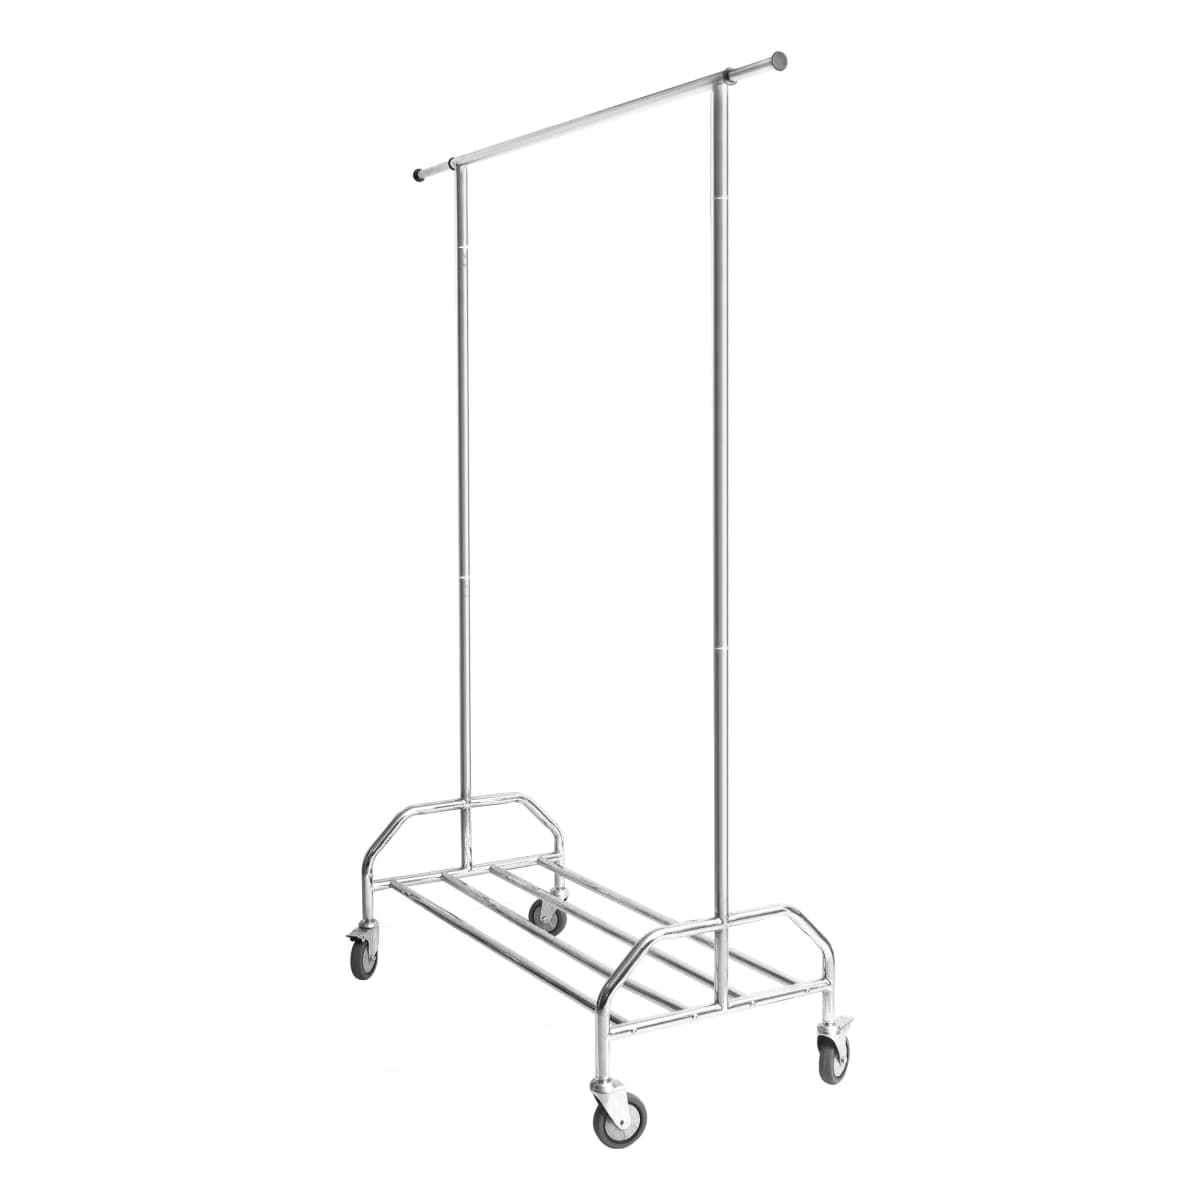 SPACEO ONE BAR METAL STAND WITH WHEELS W108CM X D53CM X H181CM